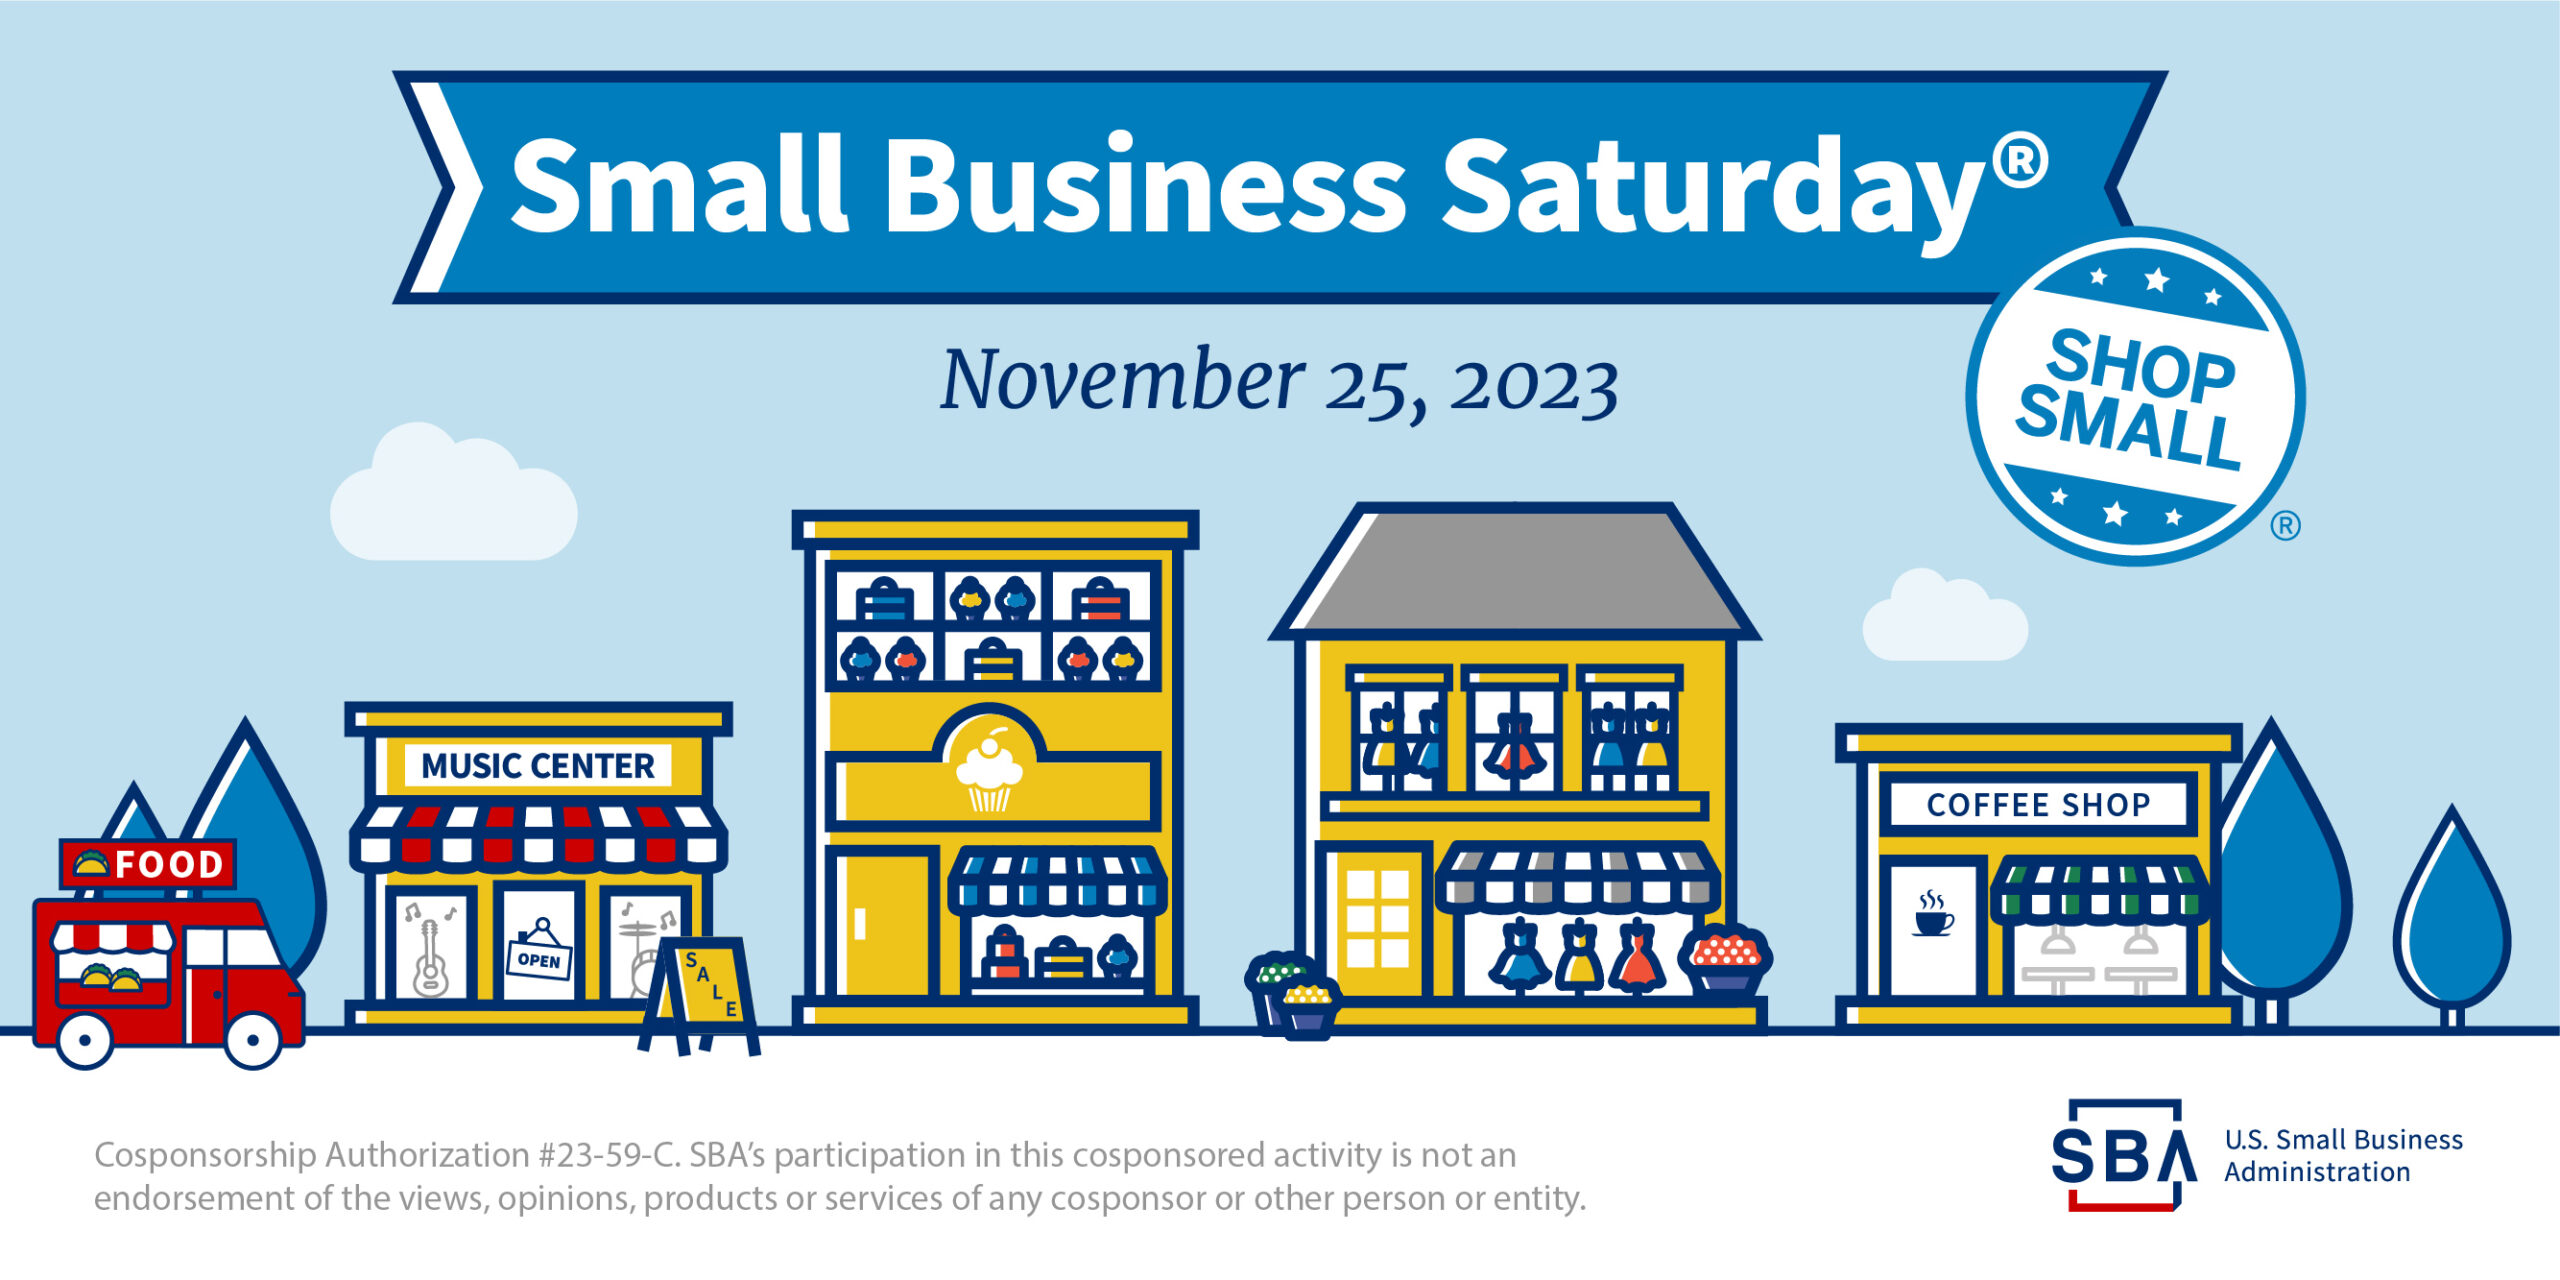 SBA invites small business shopping on November 25, “Small Business Saturday” • WIPR